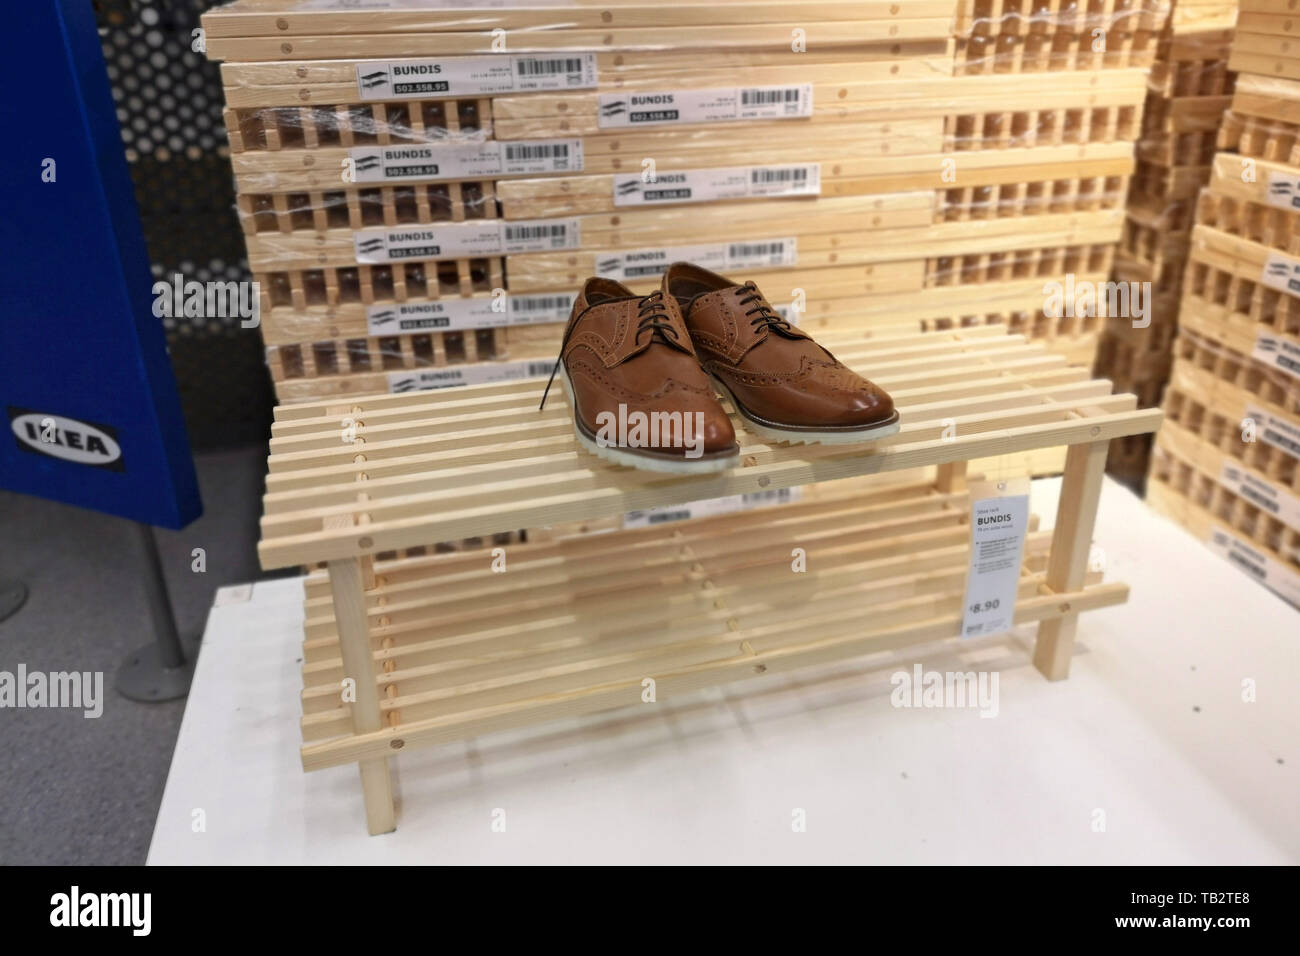 Flat pack shoe racks piled up at Ikea in Coventry, UK, on May 29, 2019  Stock Photo - Alamy